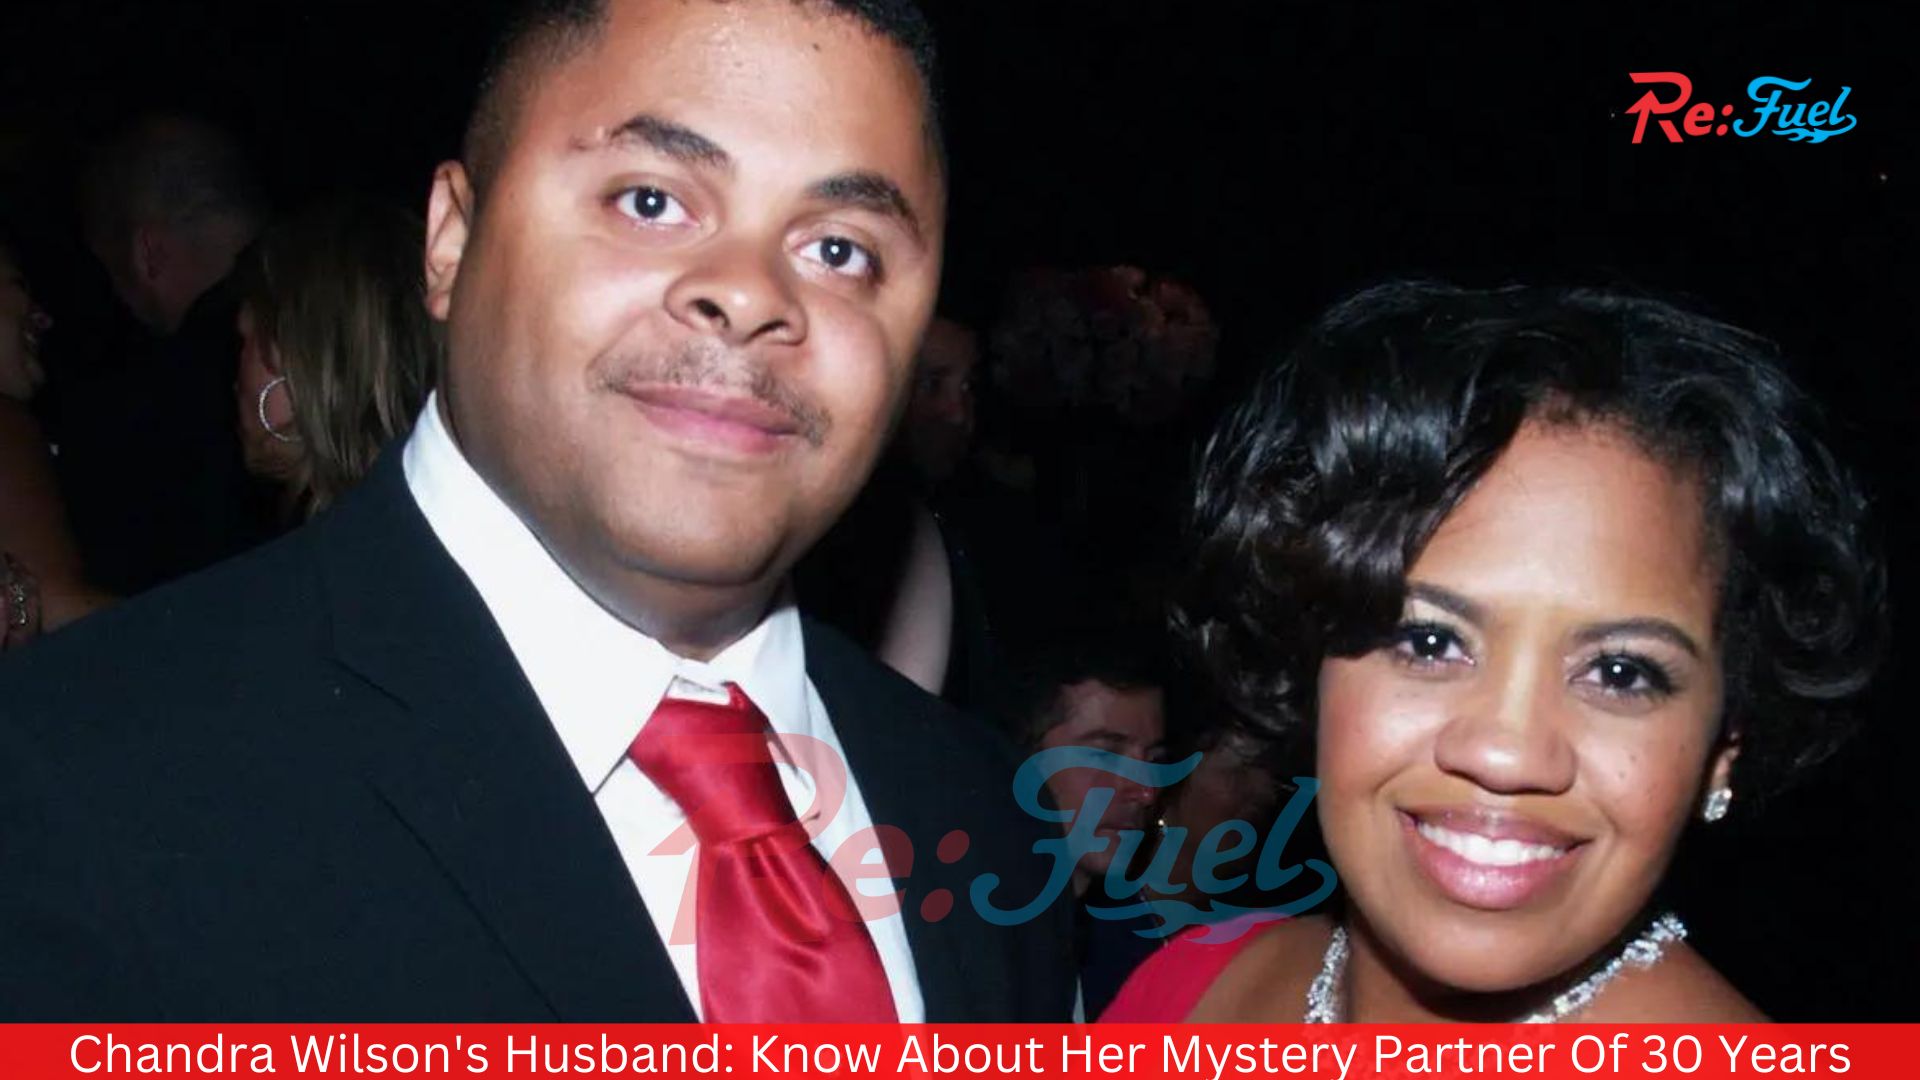 Chandra Wilson's Husband: Know About Her Mystery Partner Of 30 Years